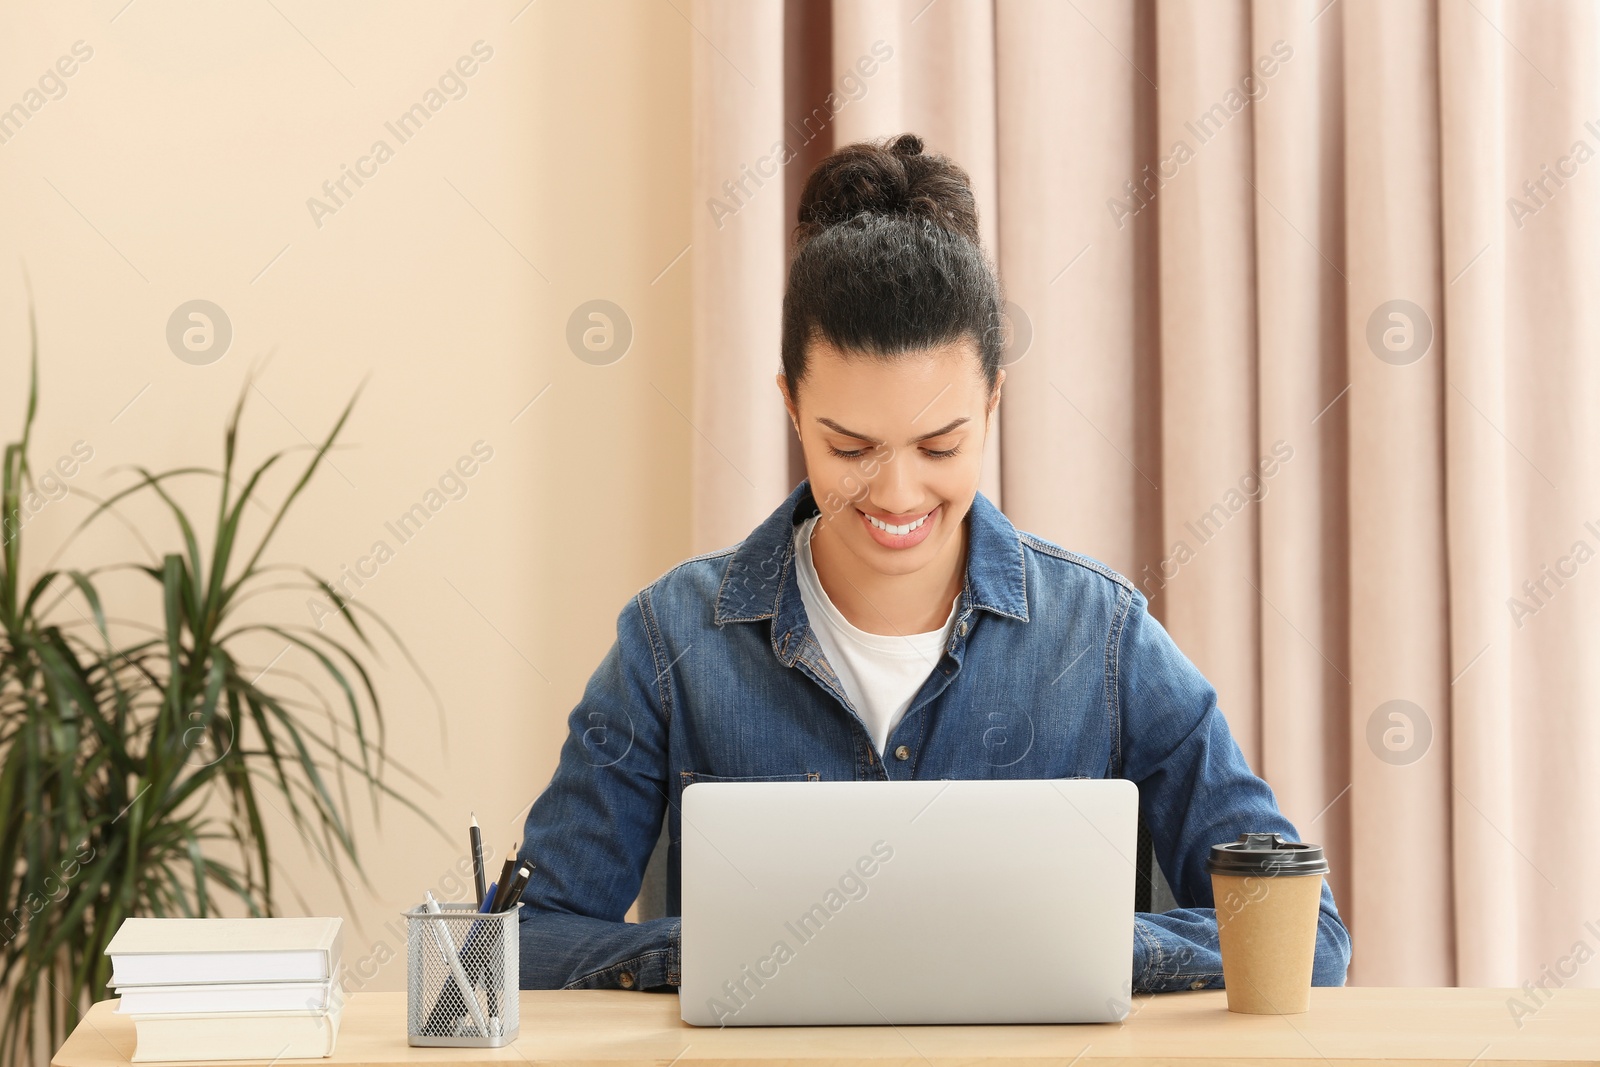 Photo of Smiling African American woman working on laptop at table indoors